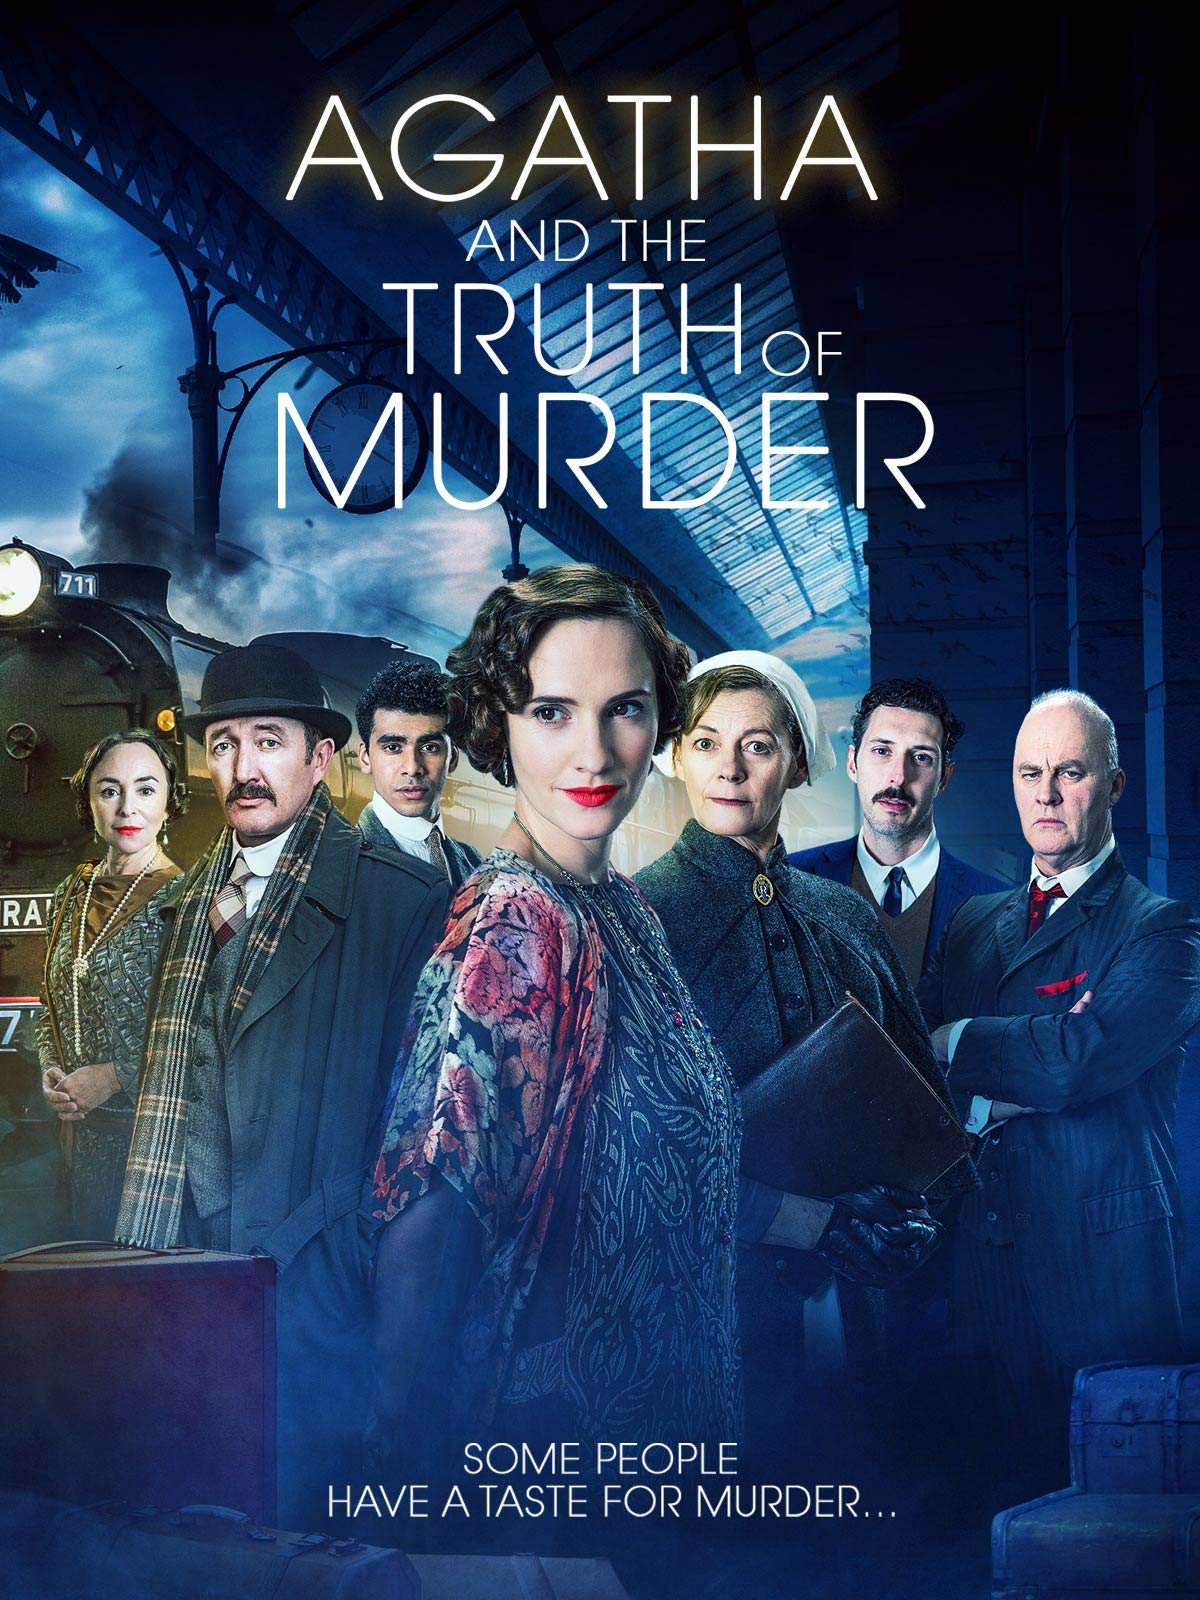 Cover art for "Agatha and the Truth of Murder"